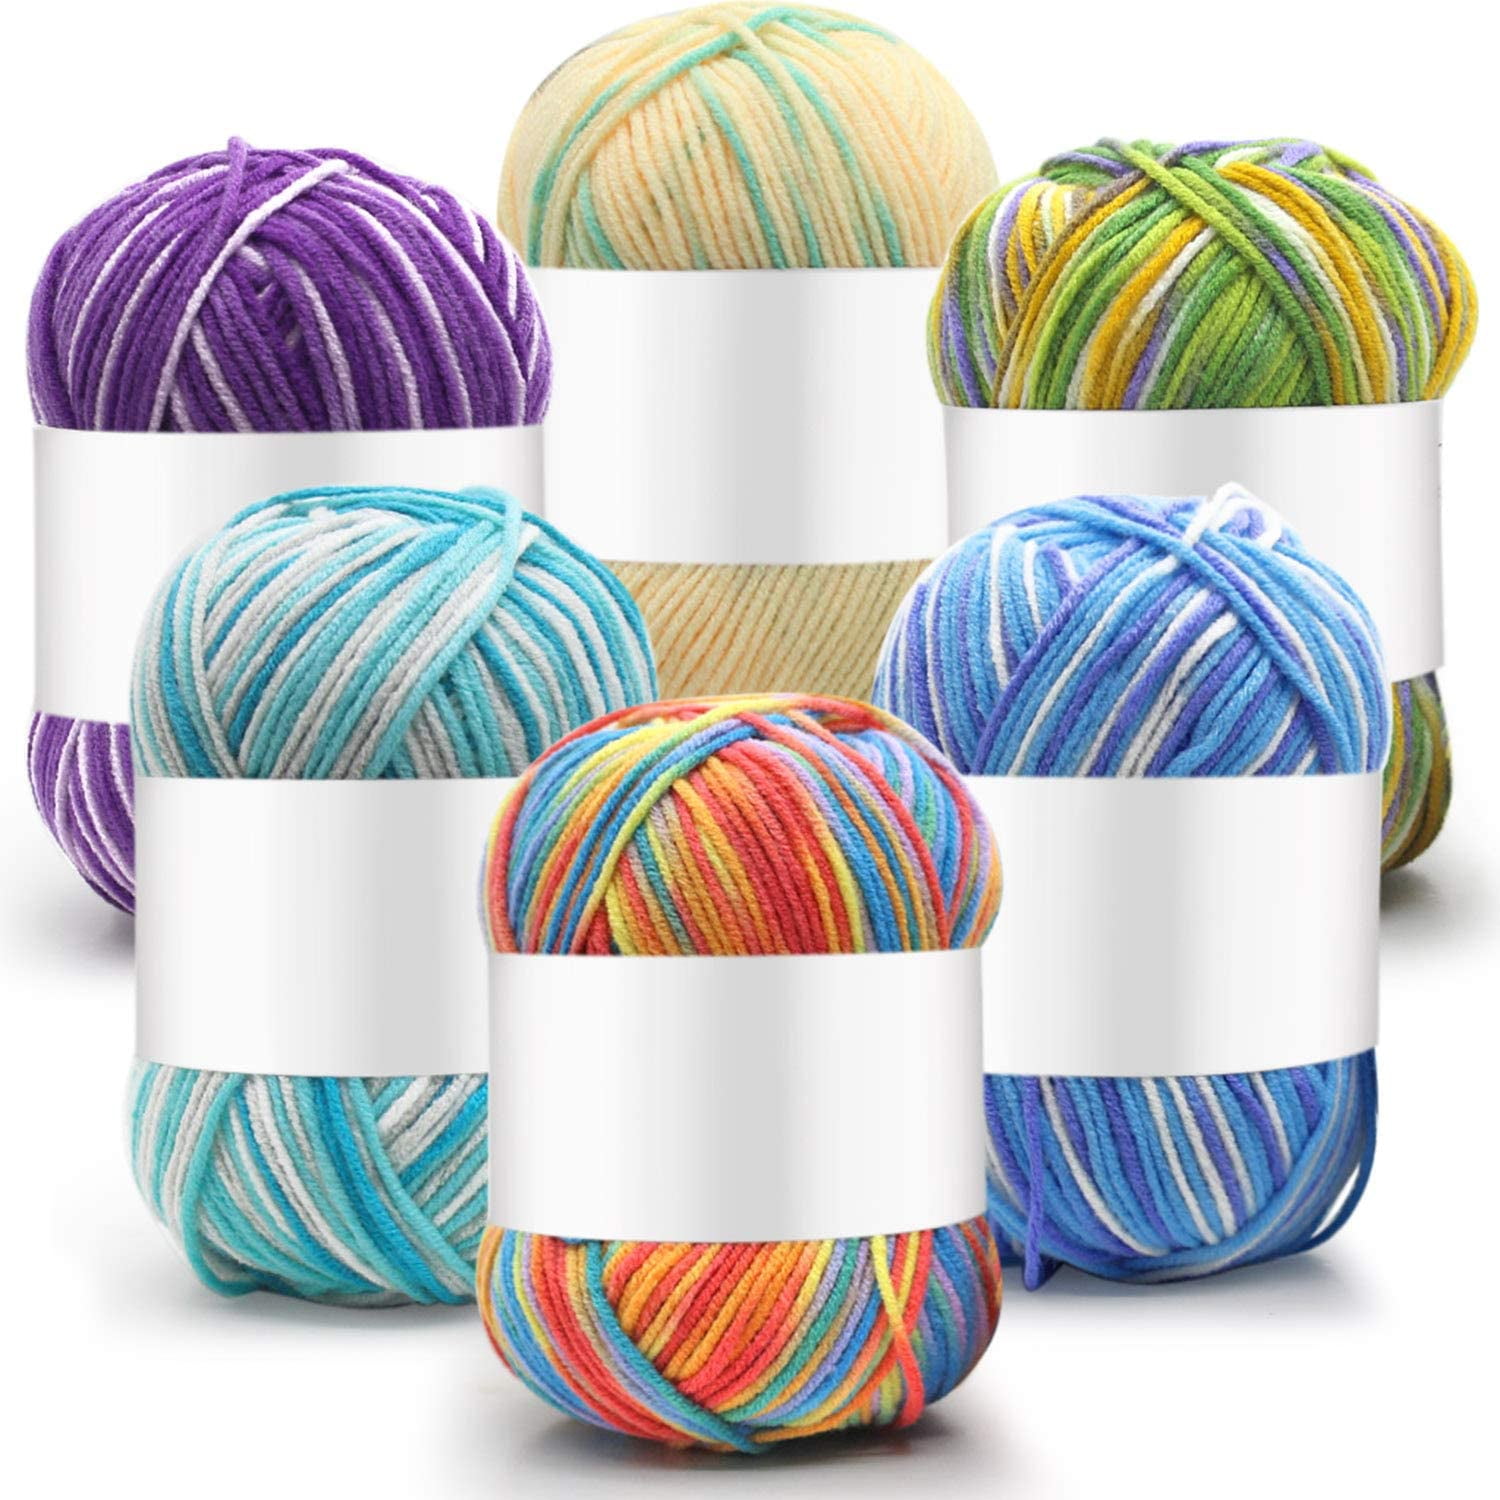 Crochet Yarn For Crafts Polyester Knitting And Crochet Yarn 6 Assorted  Colors Washable Slightly Elastic Hand-Knitted Supply For - AliExpress